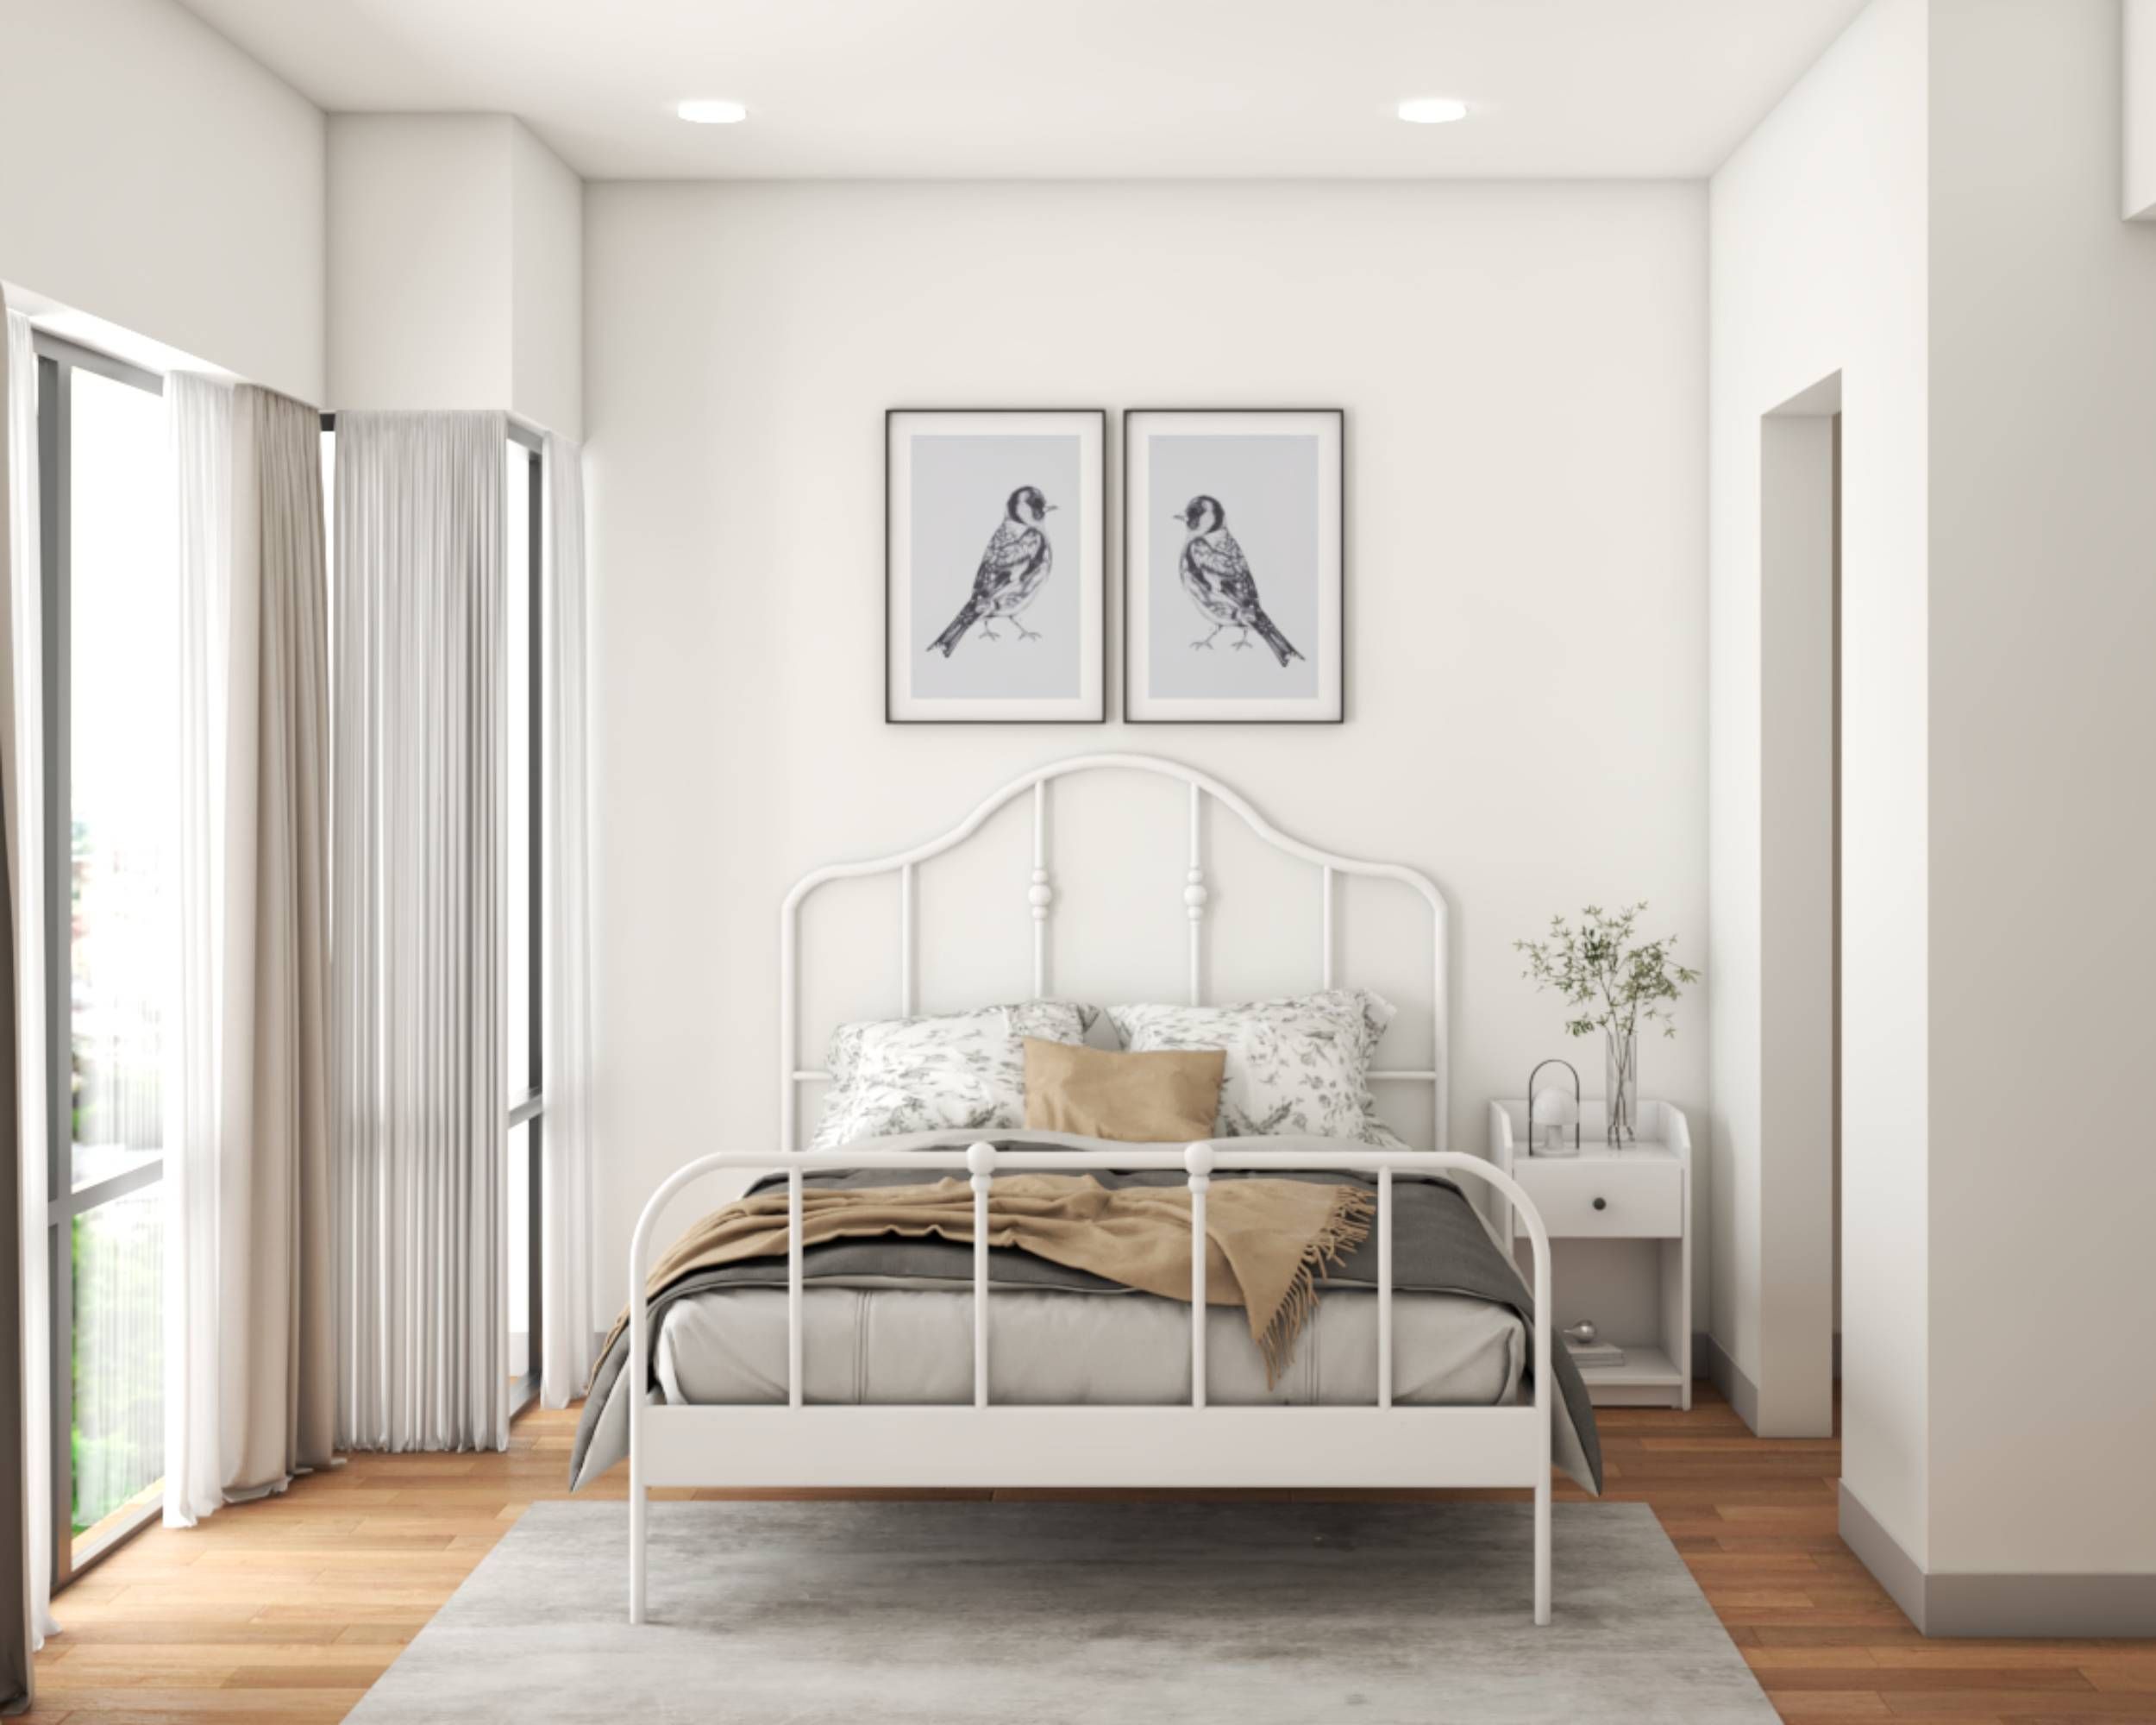 Minimalist Design With A Queen Size Metal Bed